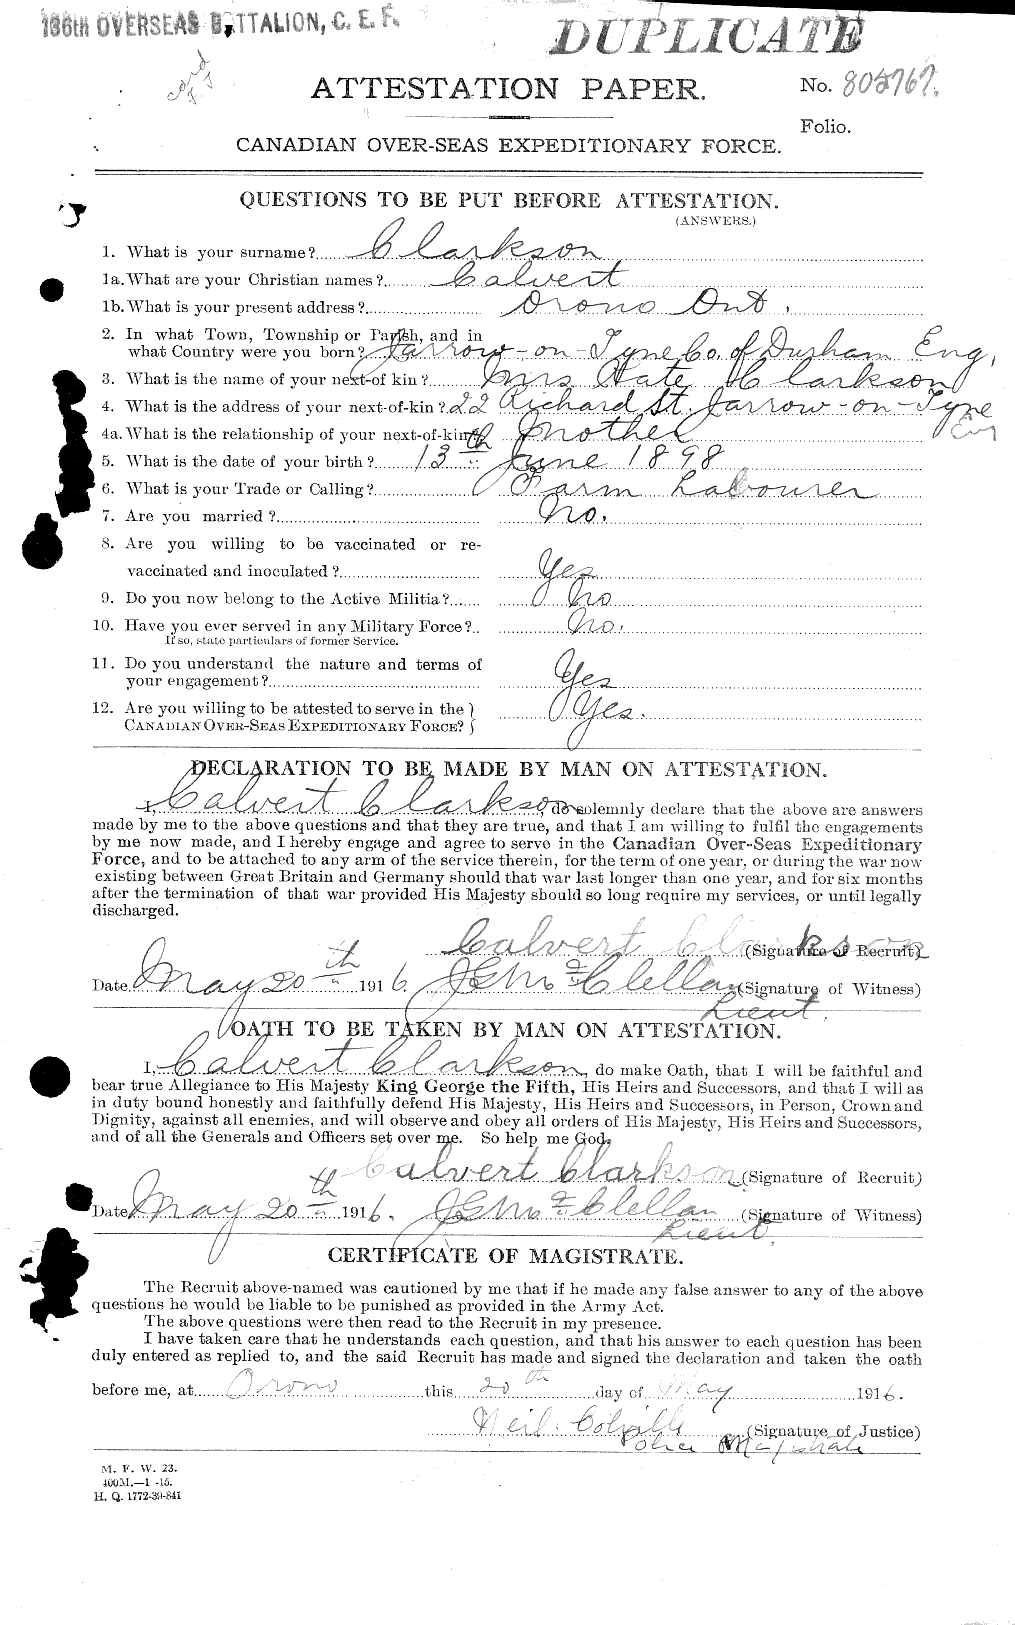 Personnel Records of the First World War - CEF 023621c